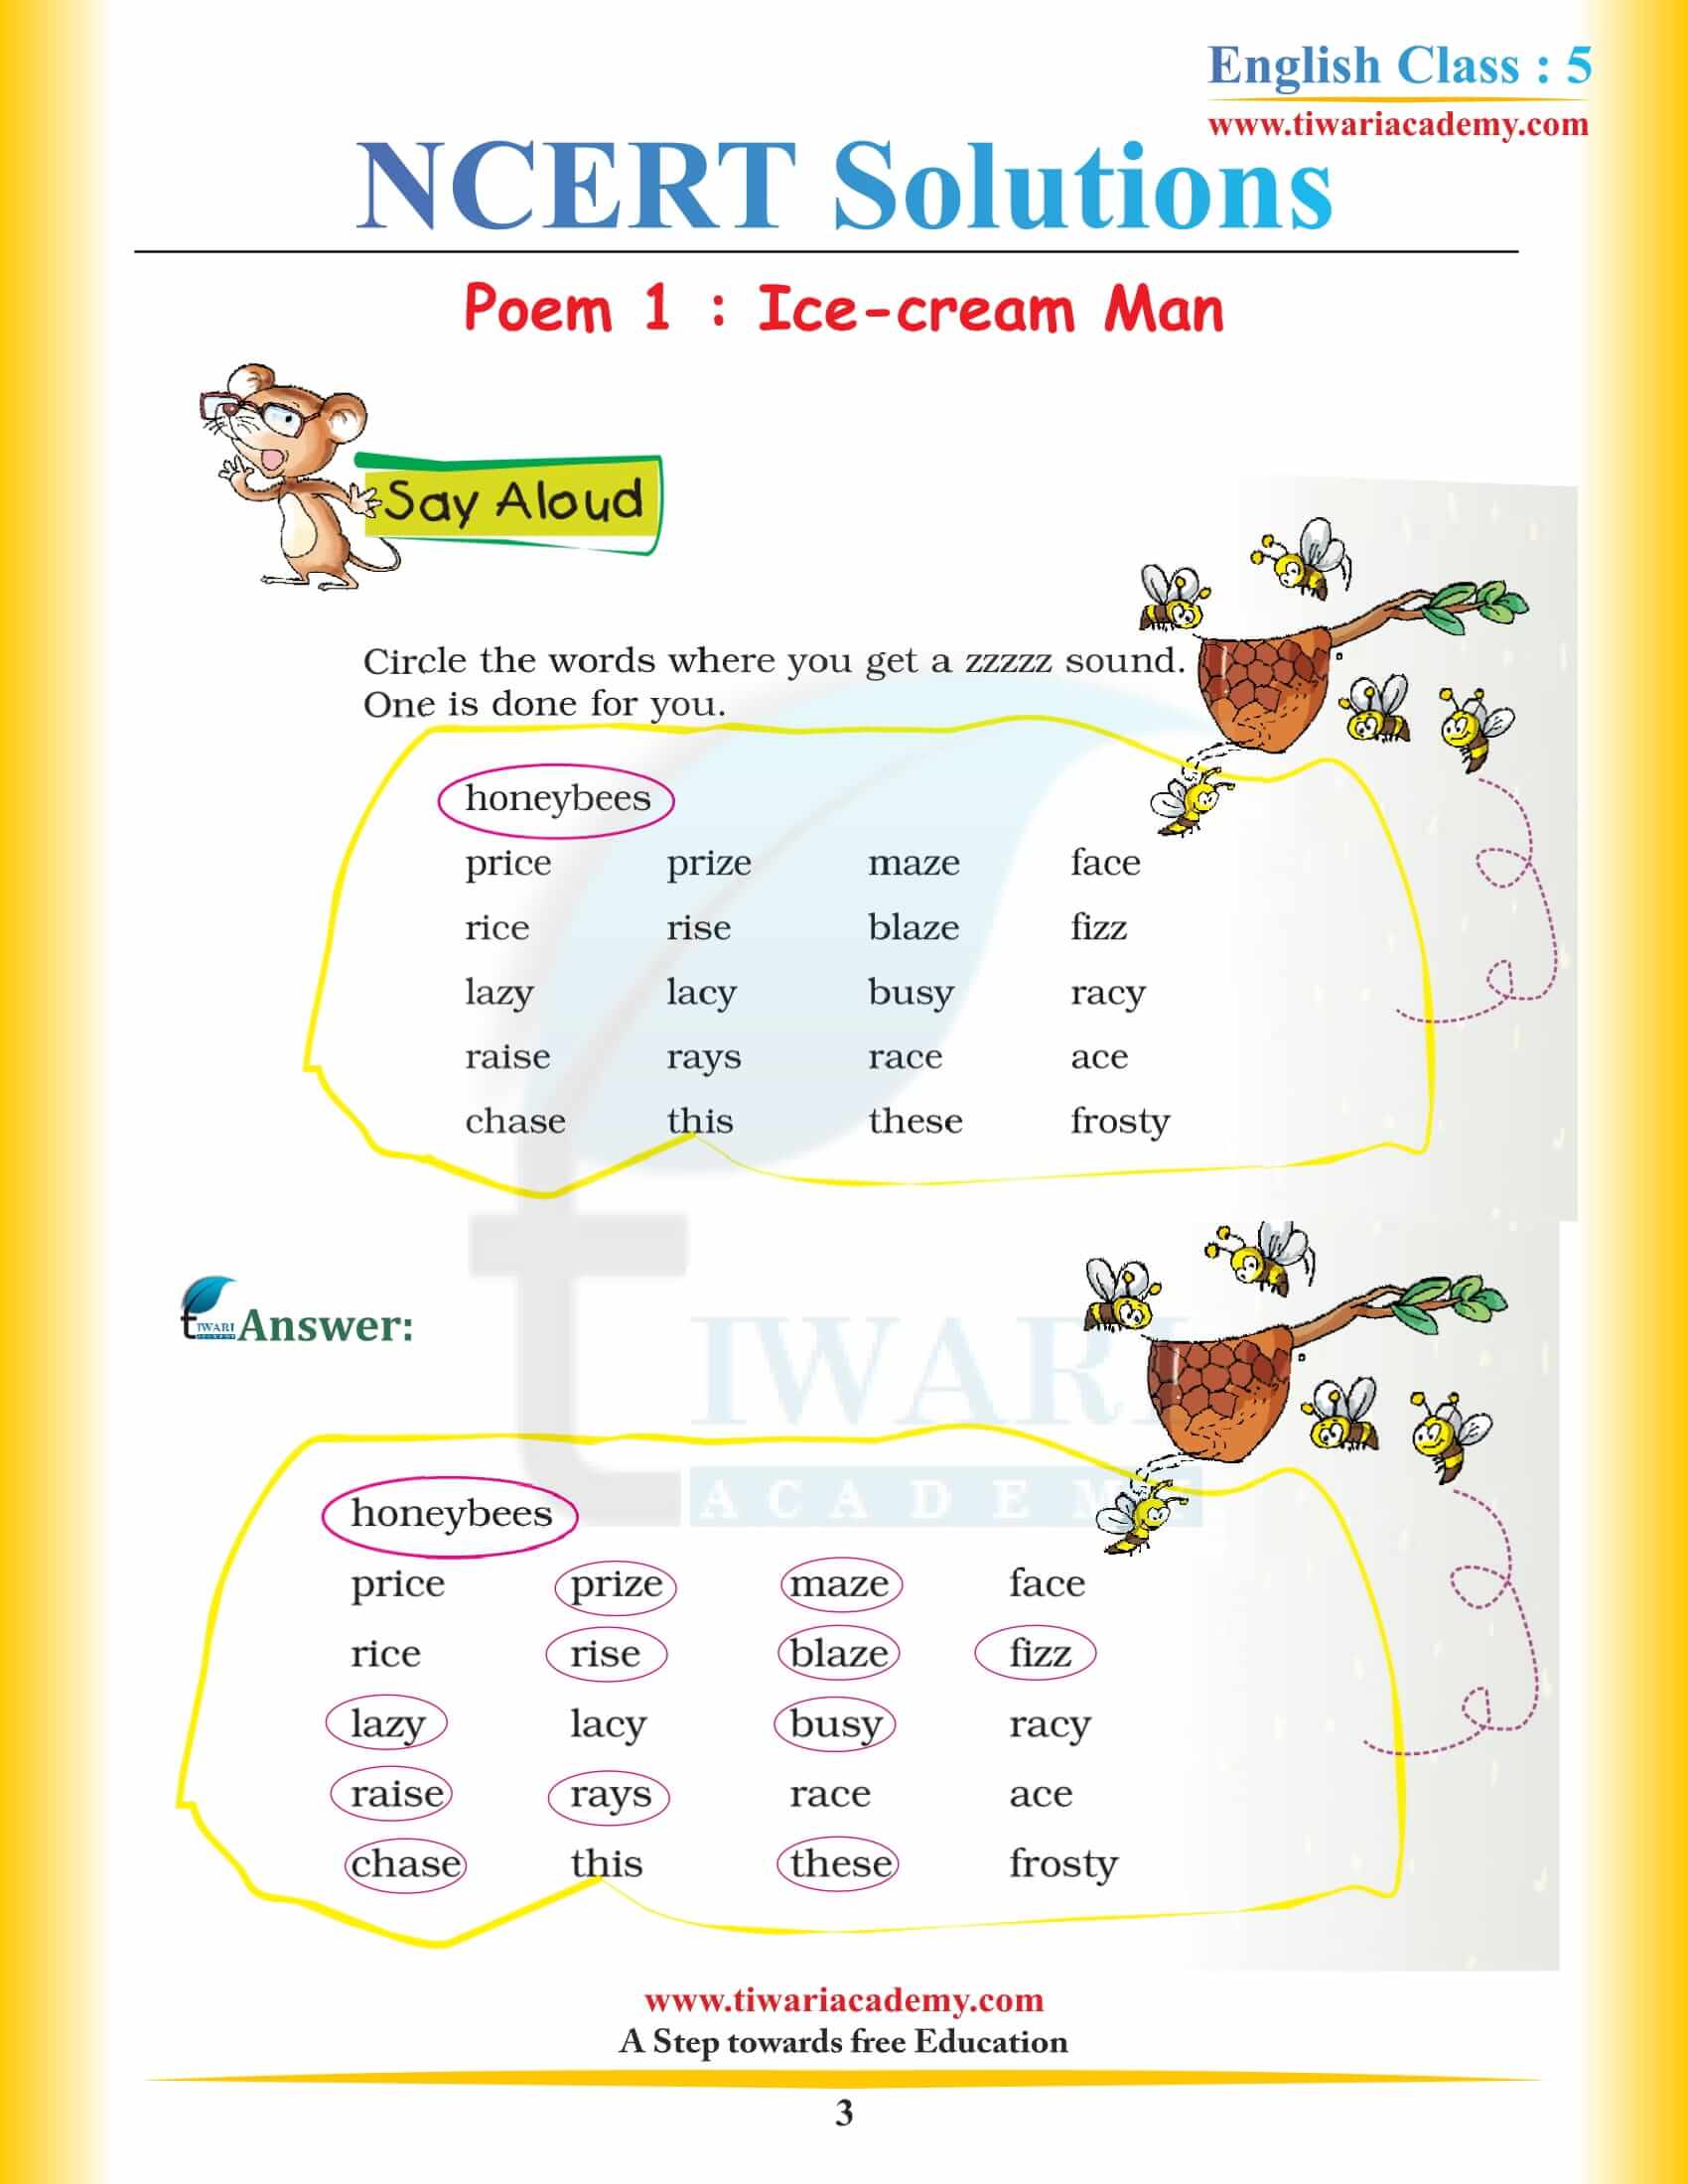 NCERT Solutions for Class 5 English Chapter 1 Ice-cream Man in Hindi